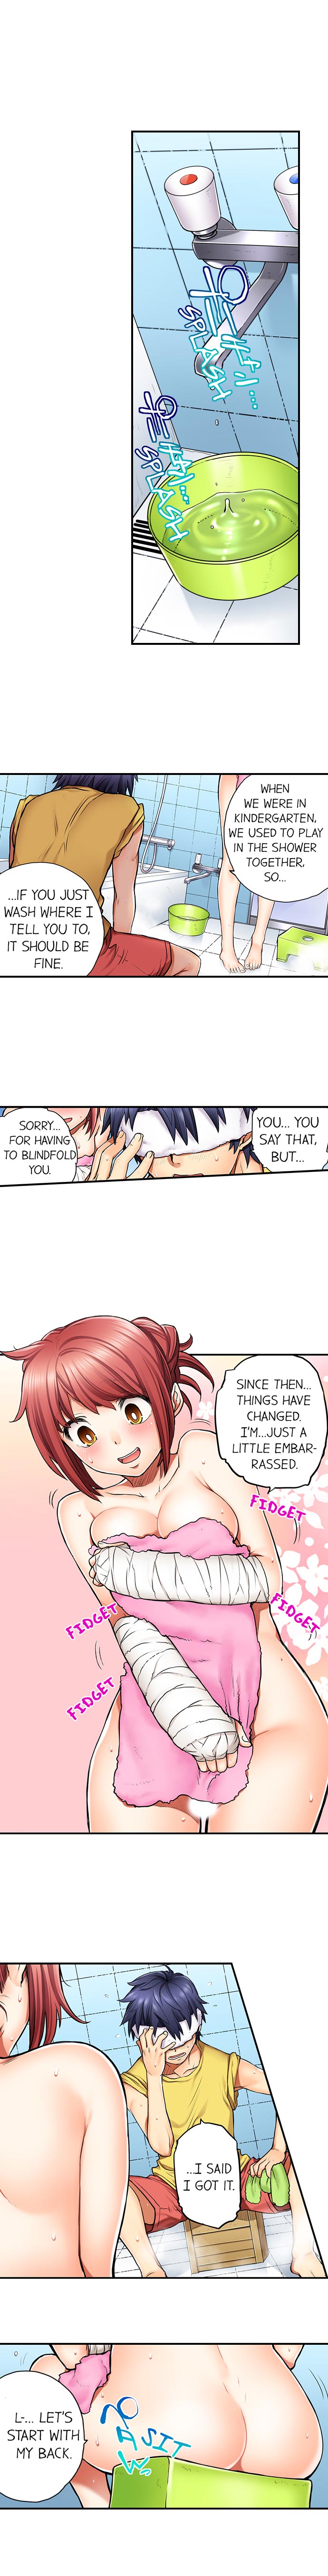 My Classmate is My Dad’s Bride, But in Bed She’s Mine. - Chapter 5 Page 3